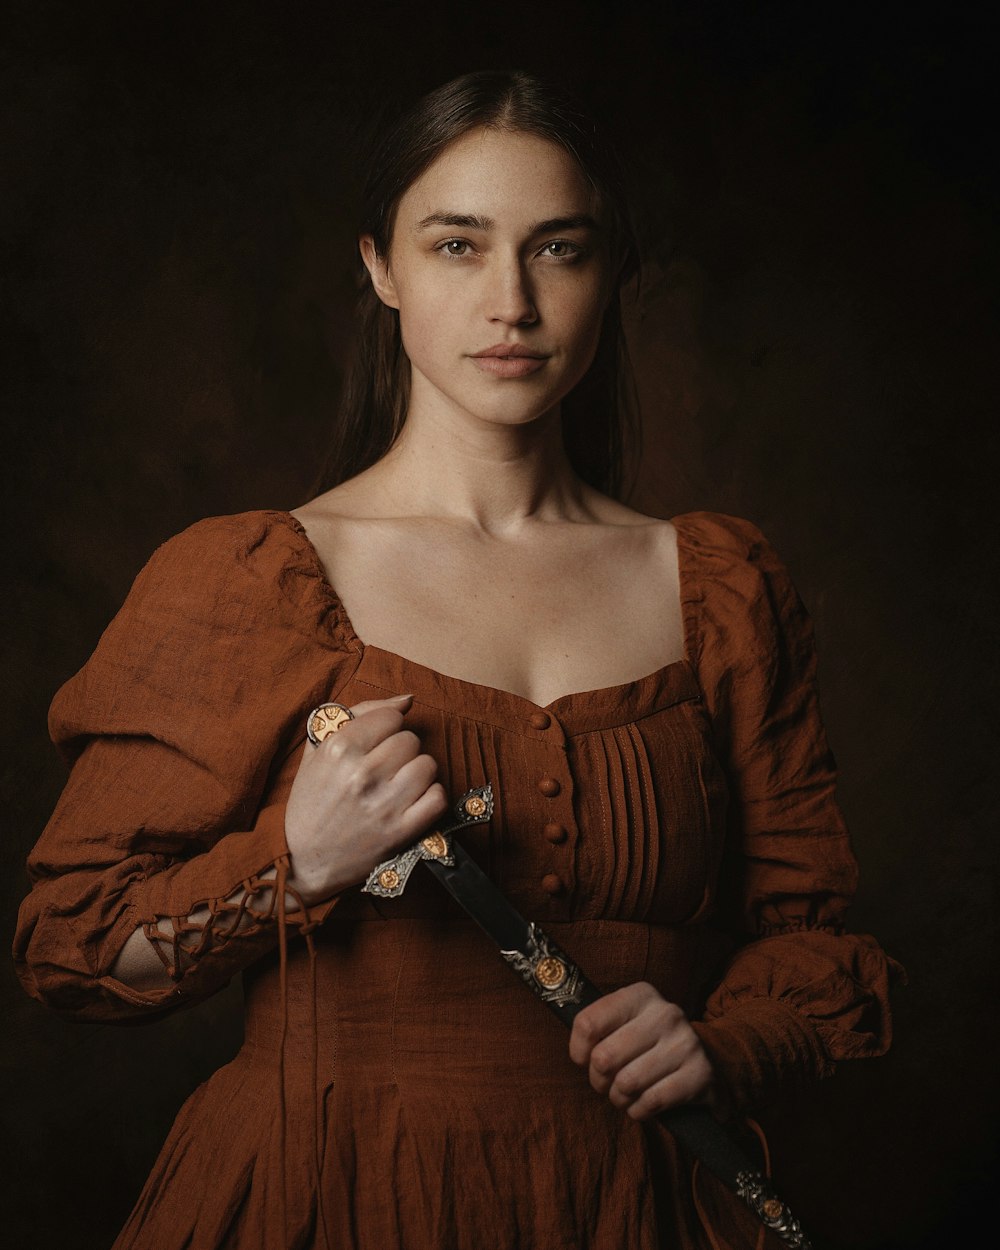 a woman in a brown dress holding a knife